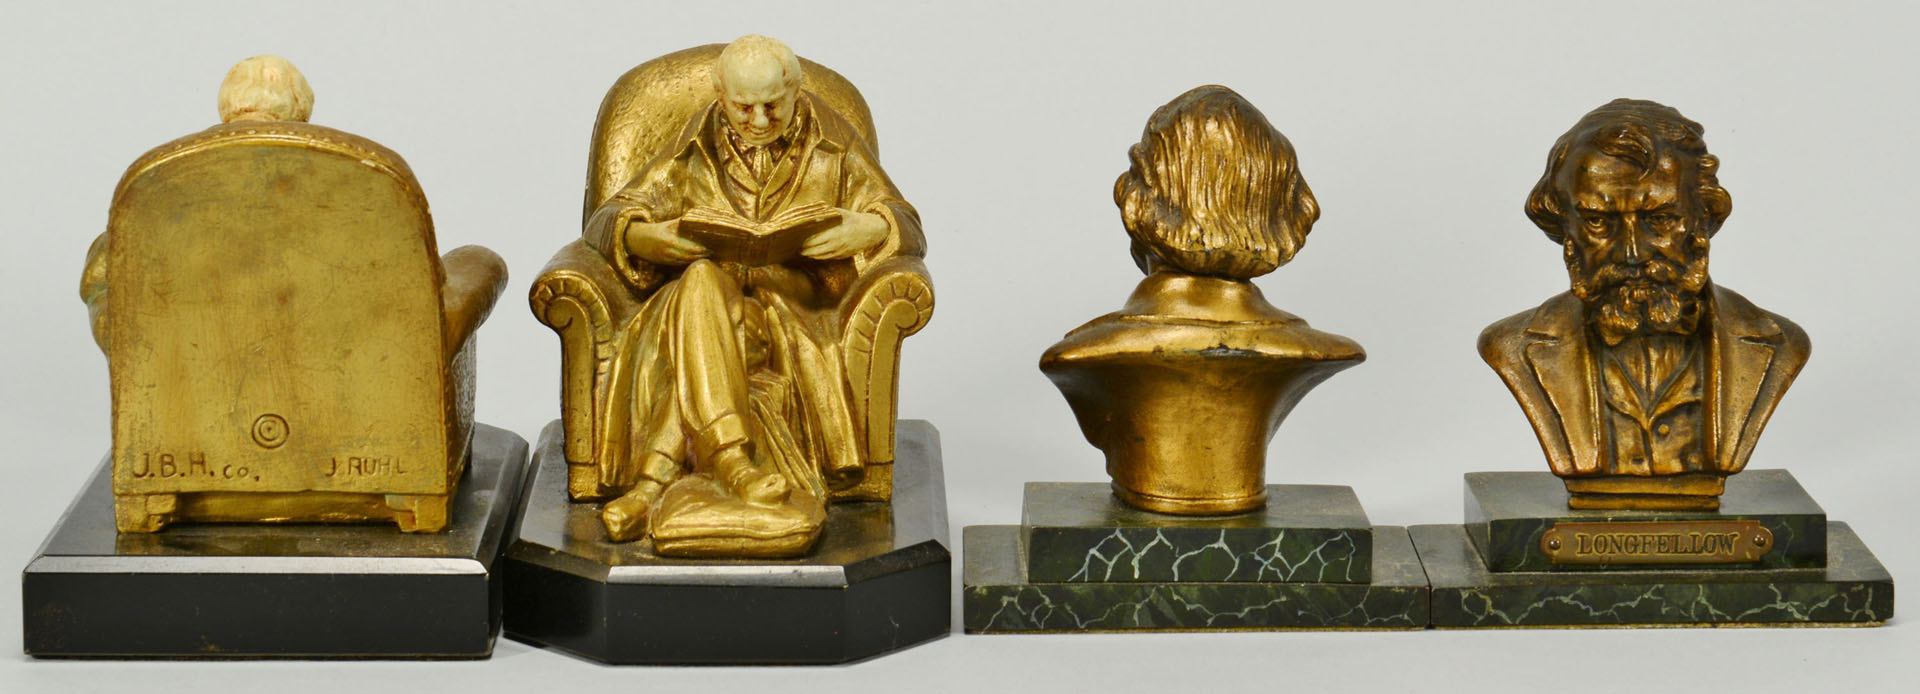 Lot 275: Group of 11 Pairs of Bookends, mostly bronze